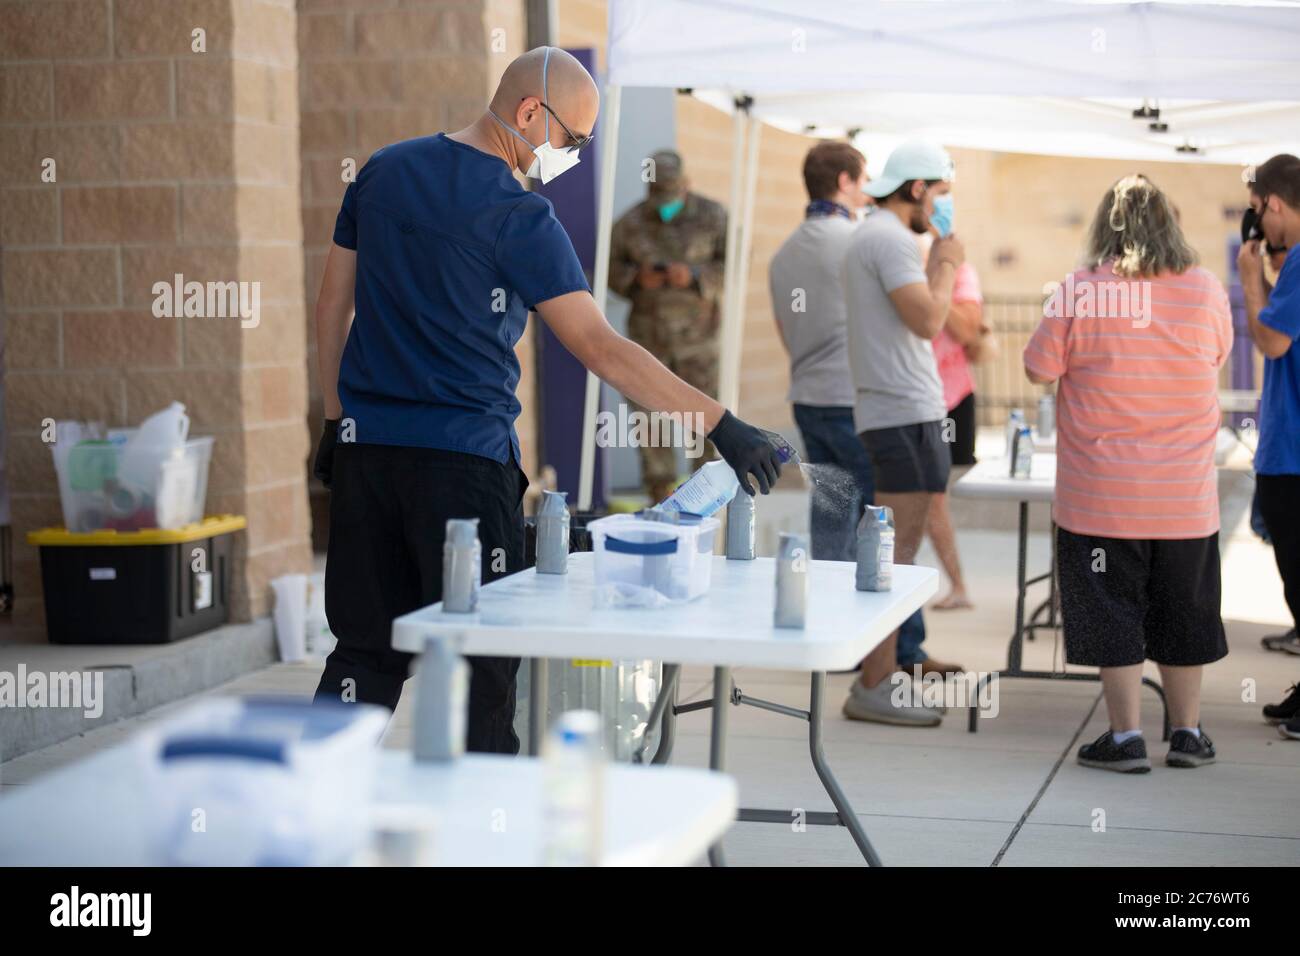 San Marcos, USA. 14th July, 2020. Specialist EZEKIEL THODY of the Texas National Guard wipes down surfaces with disinfectants after helping Hays County residents complete a non-contact test during a free COVID-19 clinic sponsored by the Texas Division of Emergency Management. Texas has seen a huge spike in cases since an early reopening last month and a total of over 3,200 deaths attributed to the virus. Credit: Bob Daemmrich/Alamy Live News Stock Photo